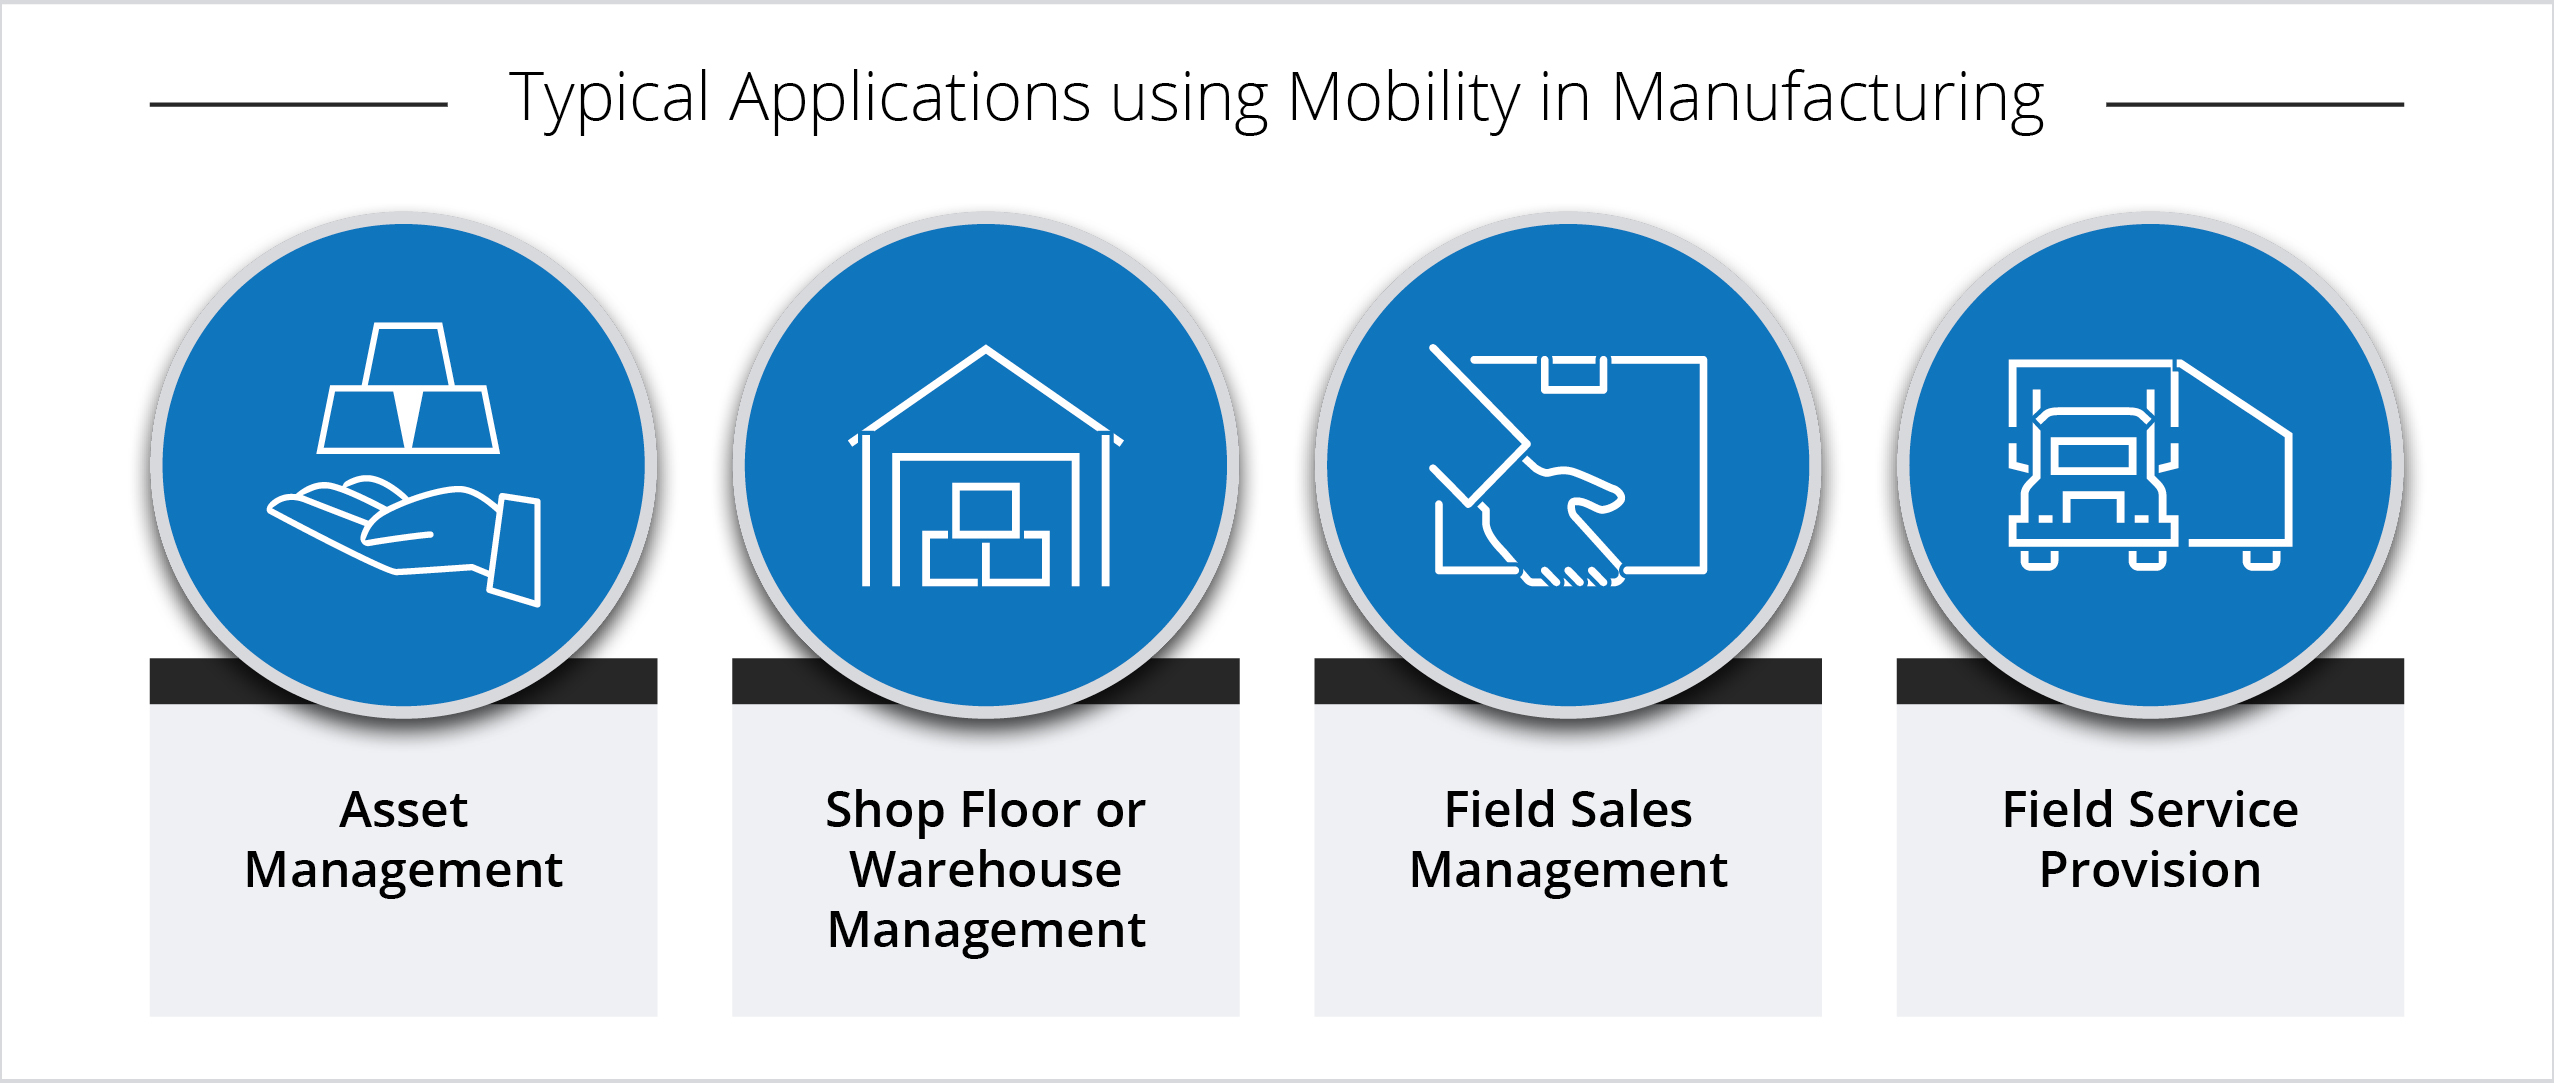 Mobility in Manufacturing1